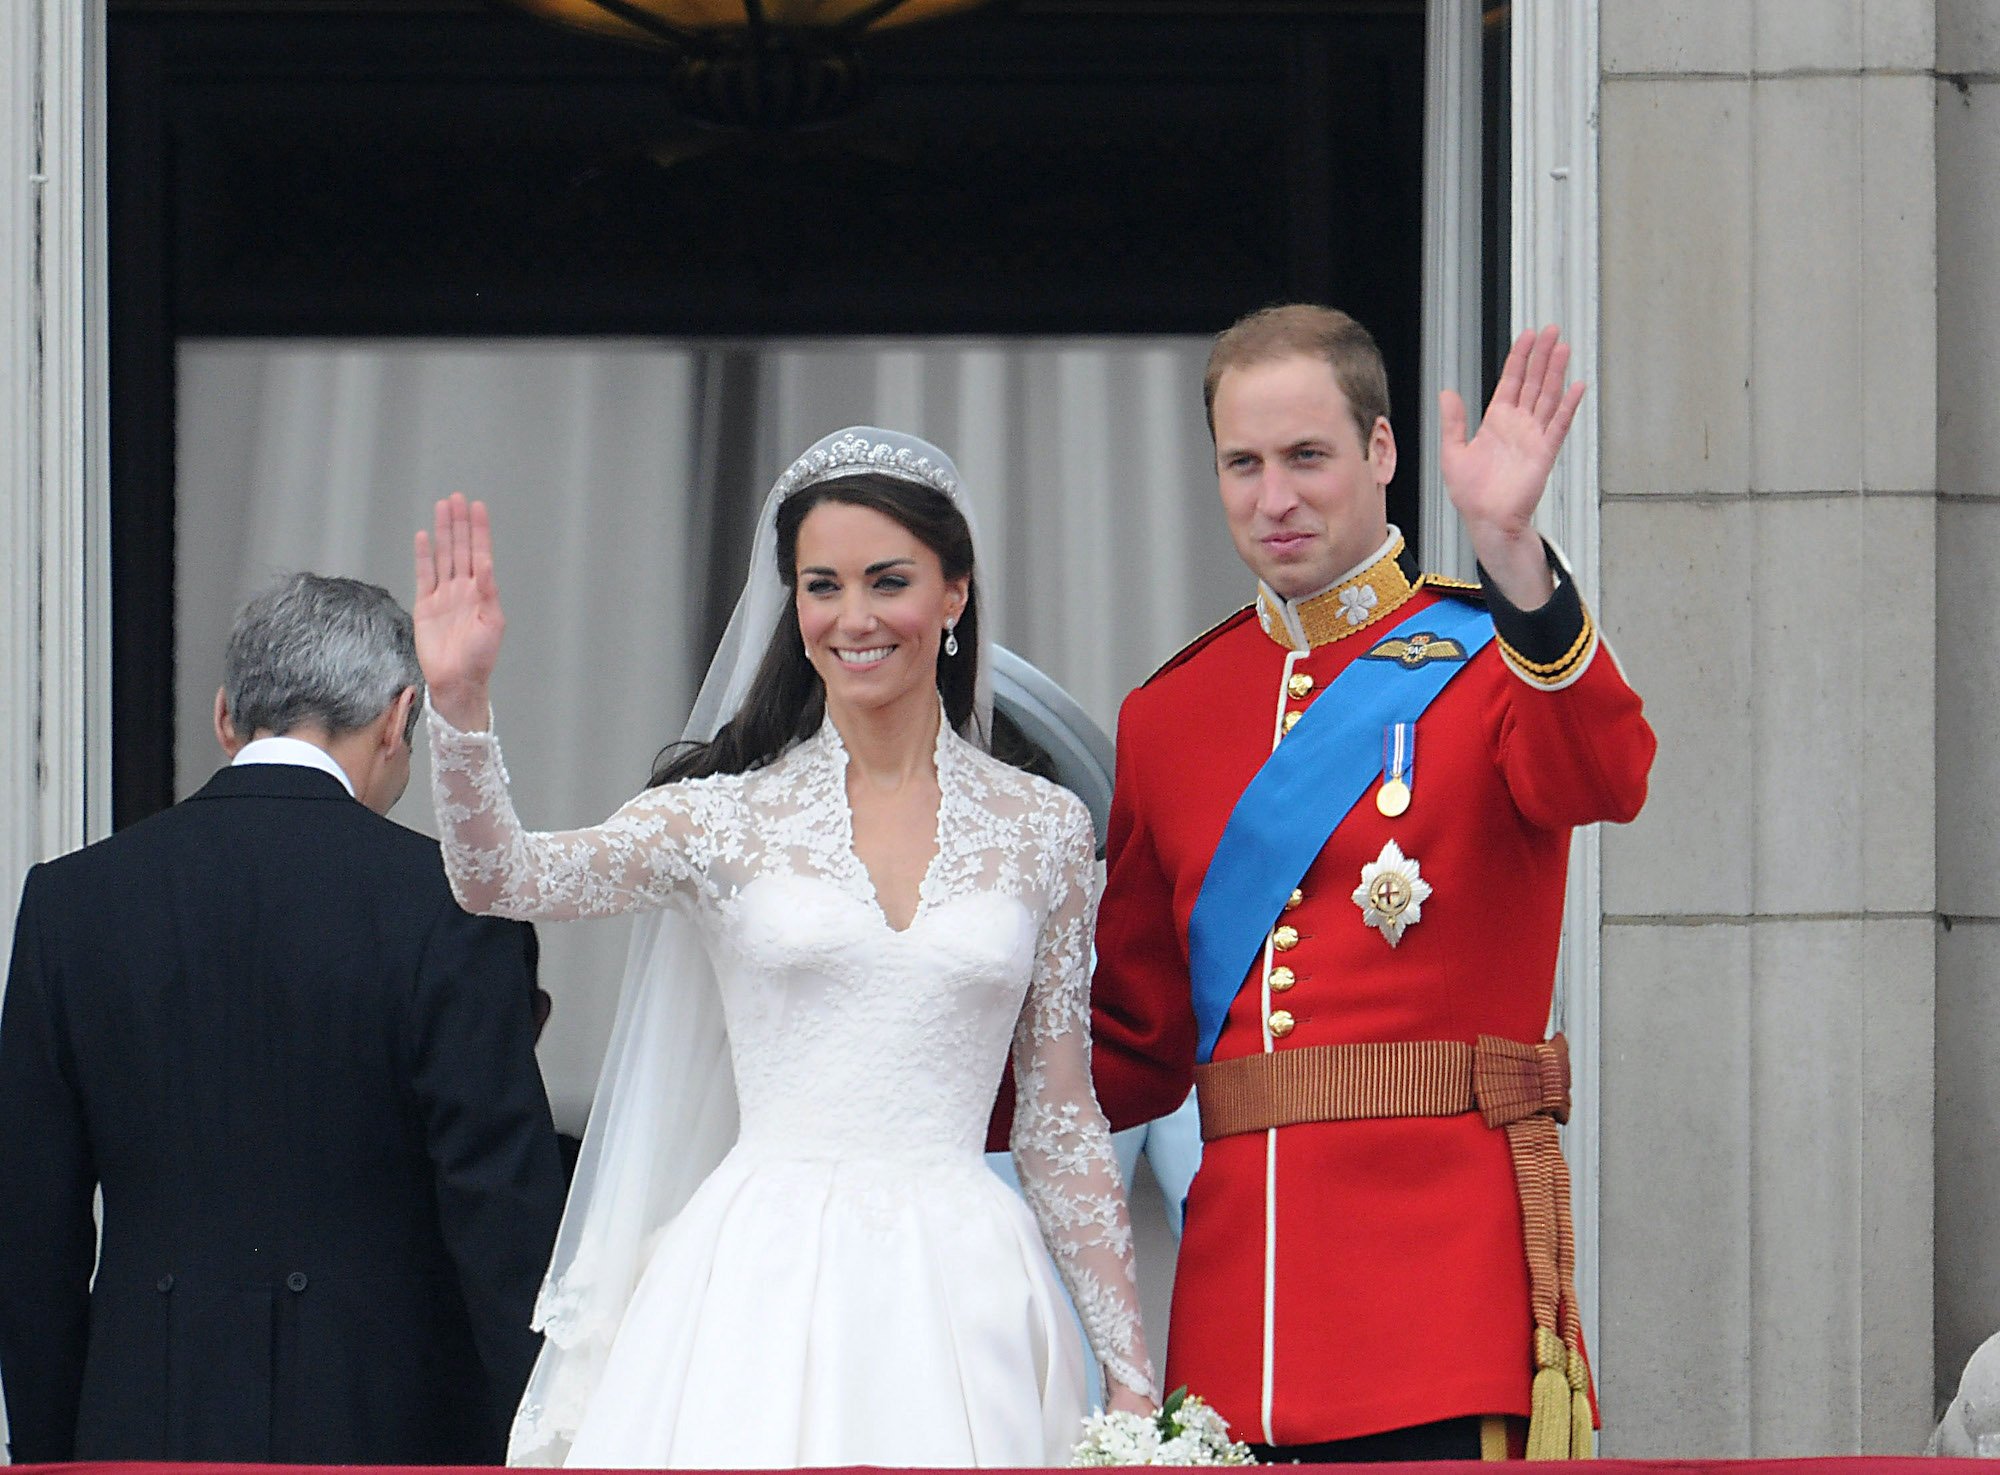 William and Kate wedding day photo showing Catherine, Duchess of Cambridge and Prince William waving from a balcony